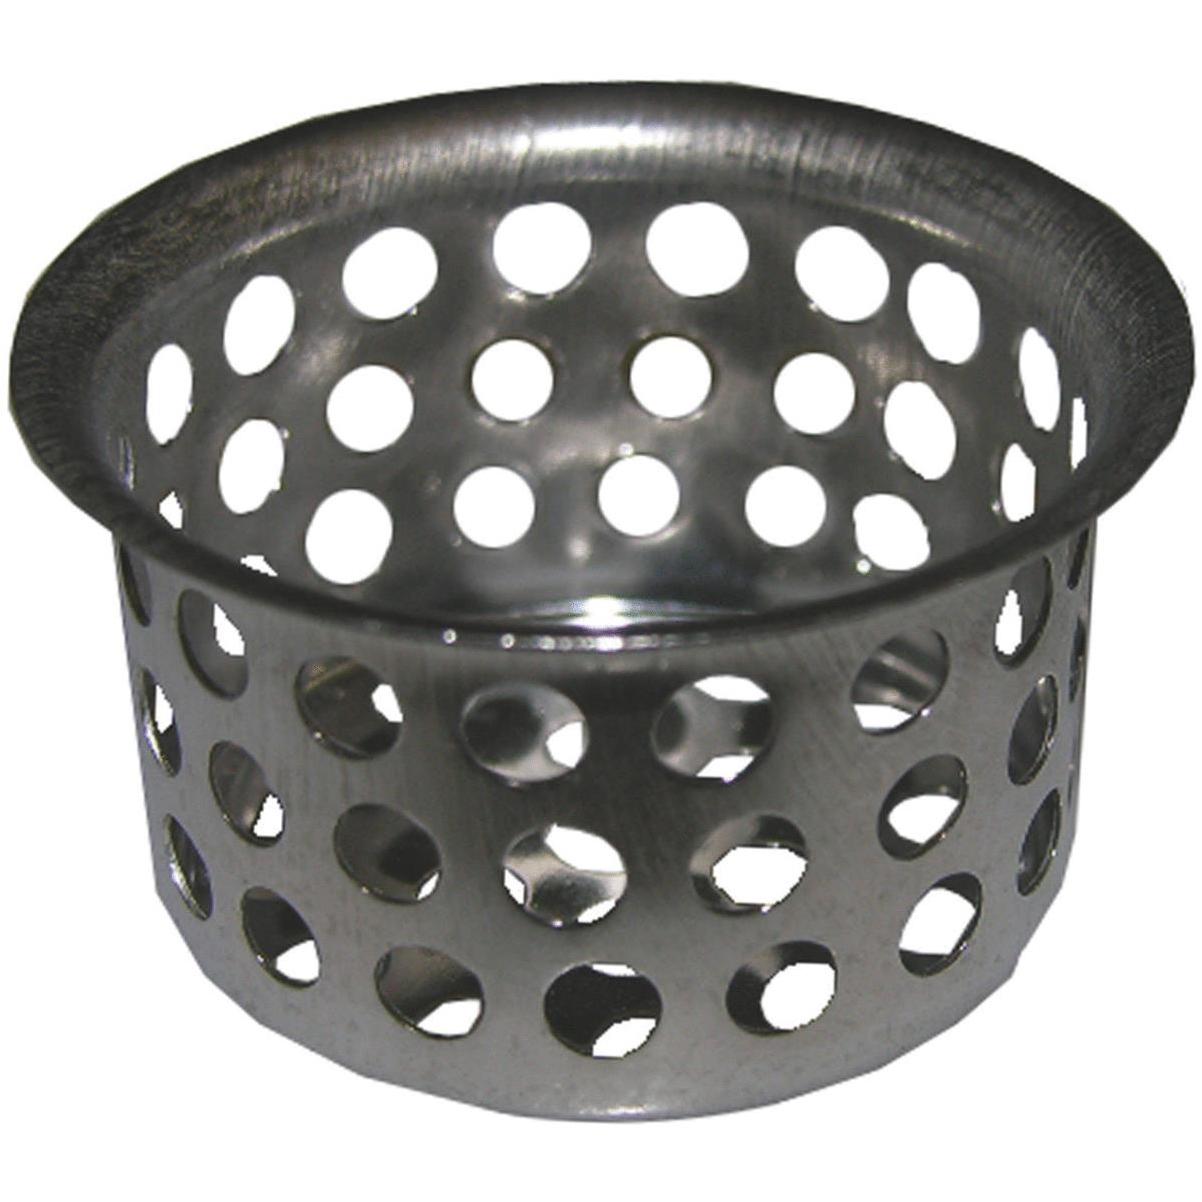 Lasco 1-5/8 In. Snap-In Tub Drain Strainer with Chrome Plated